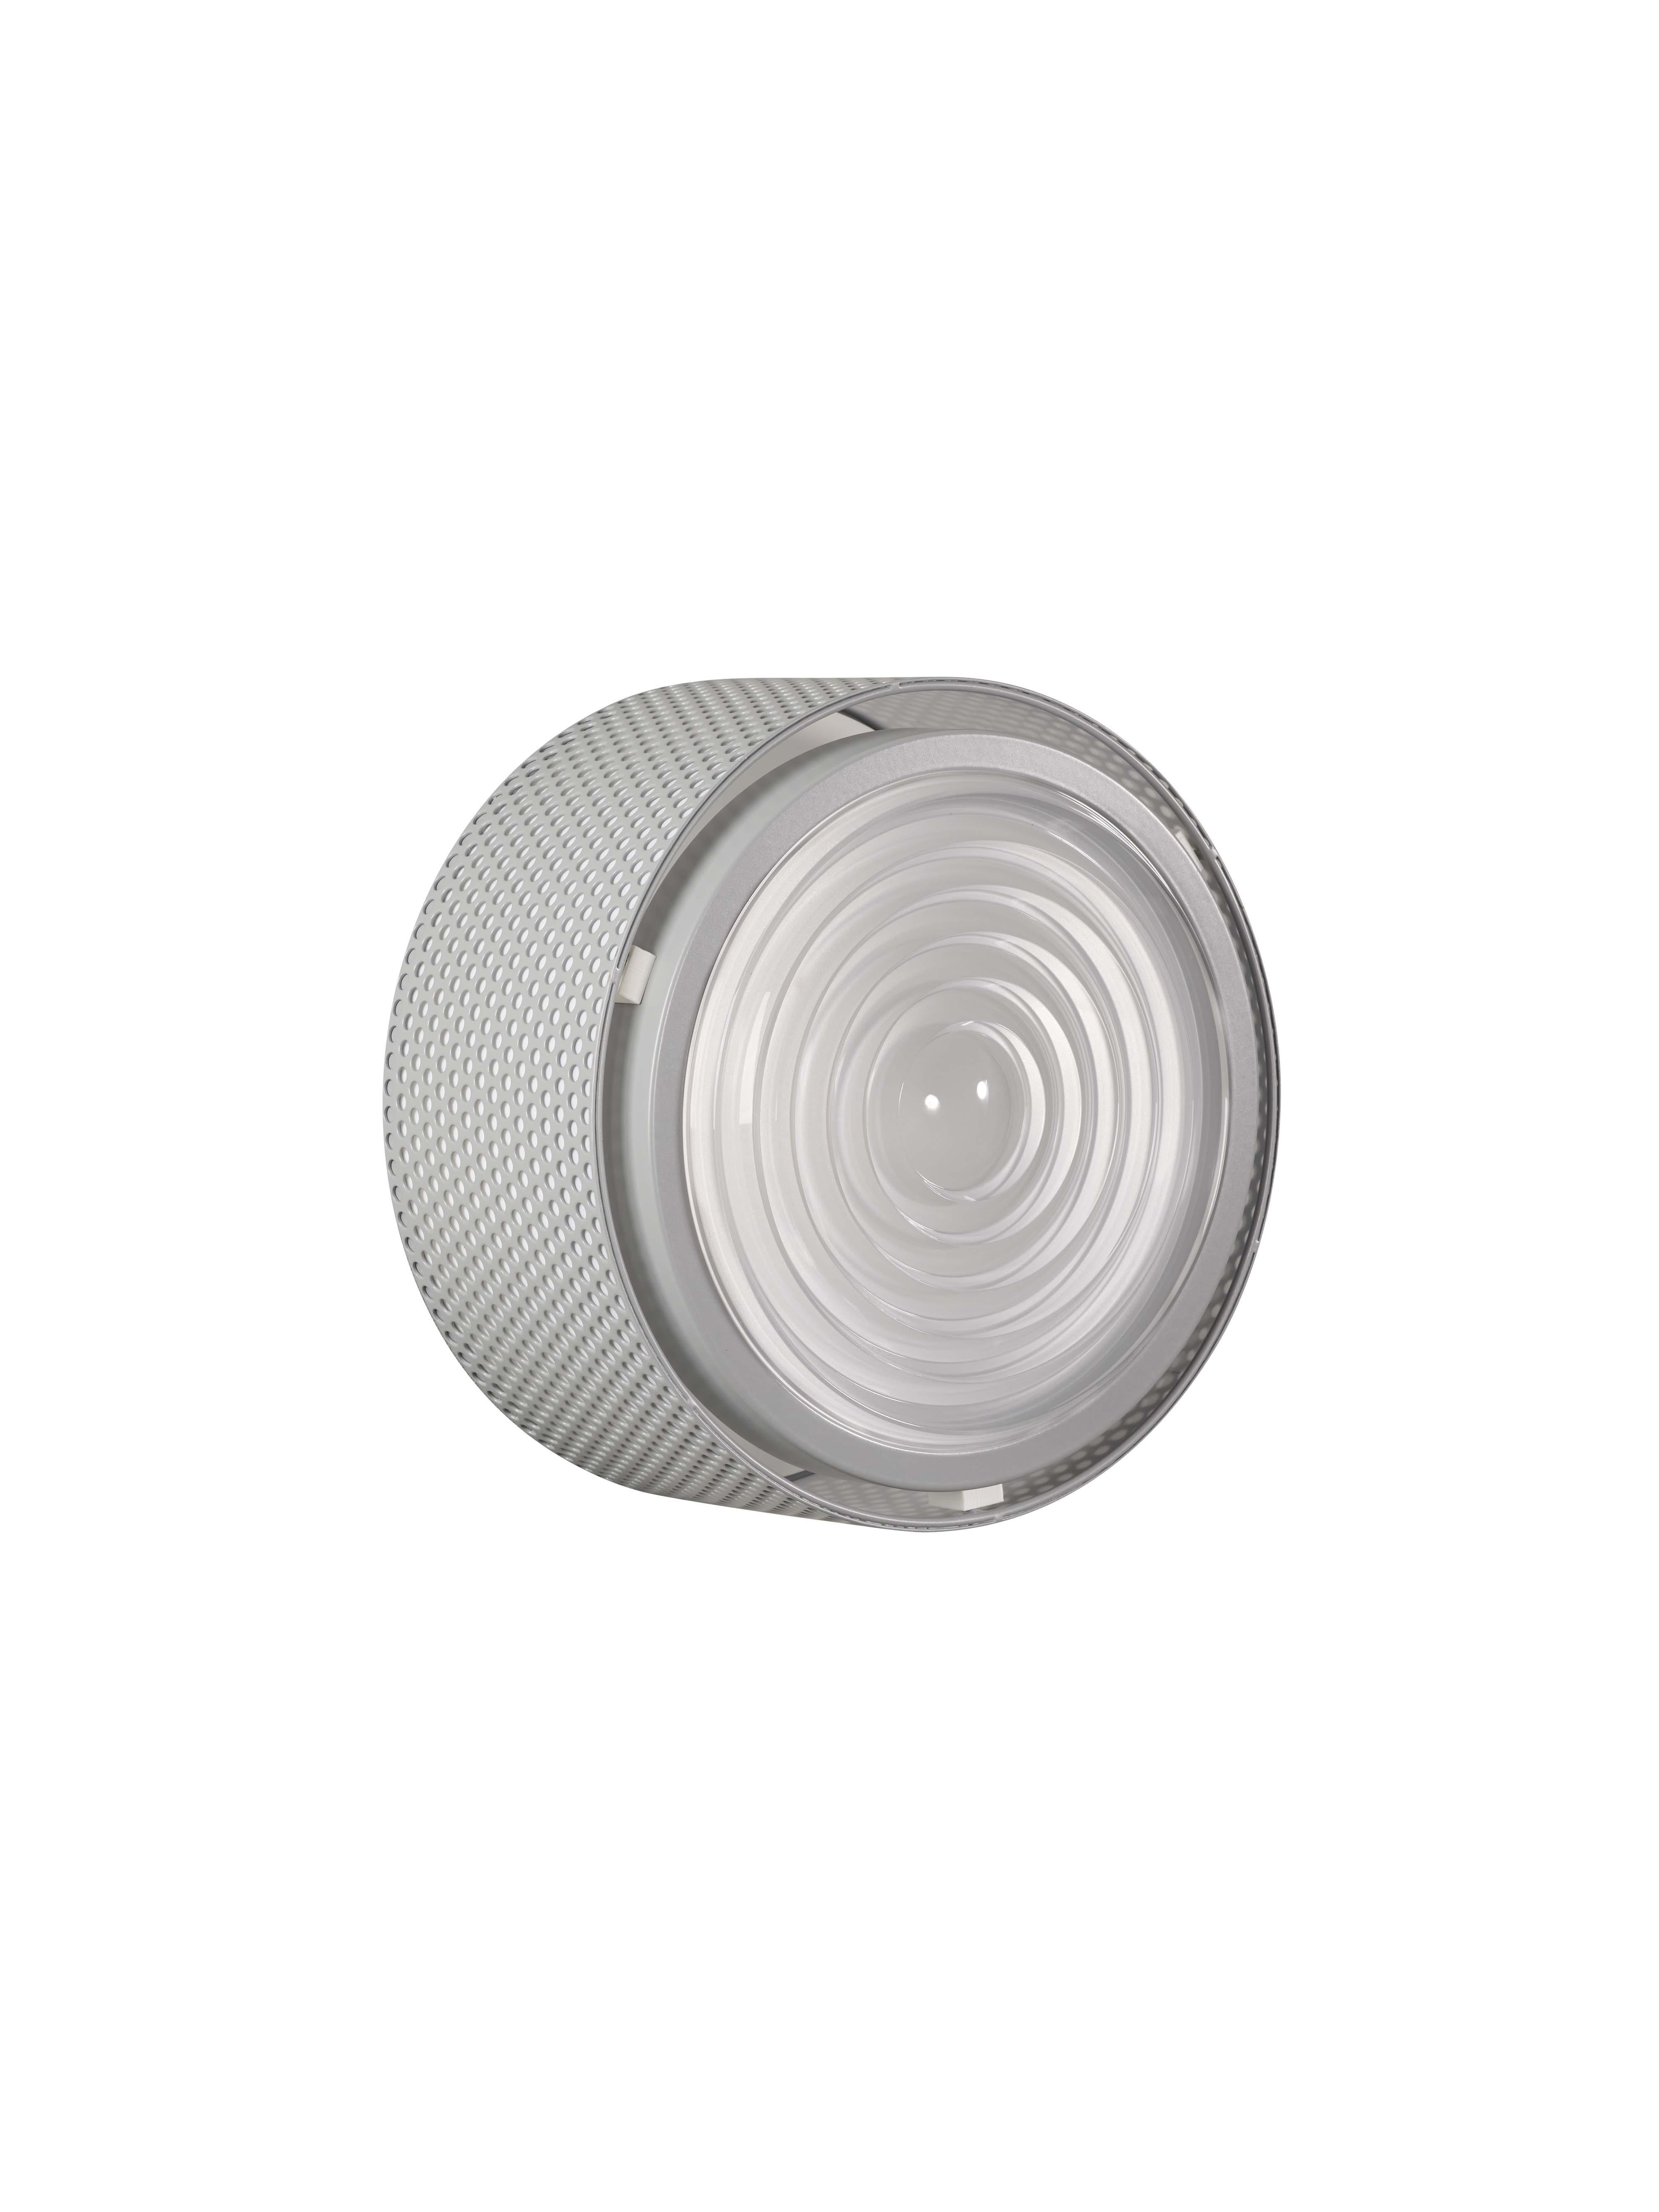 Pierre Guariche 'G13' Wall or Ceiling Light for Sammode Studio in Gray For Sale 2